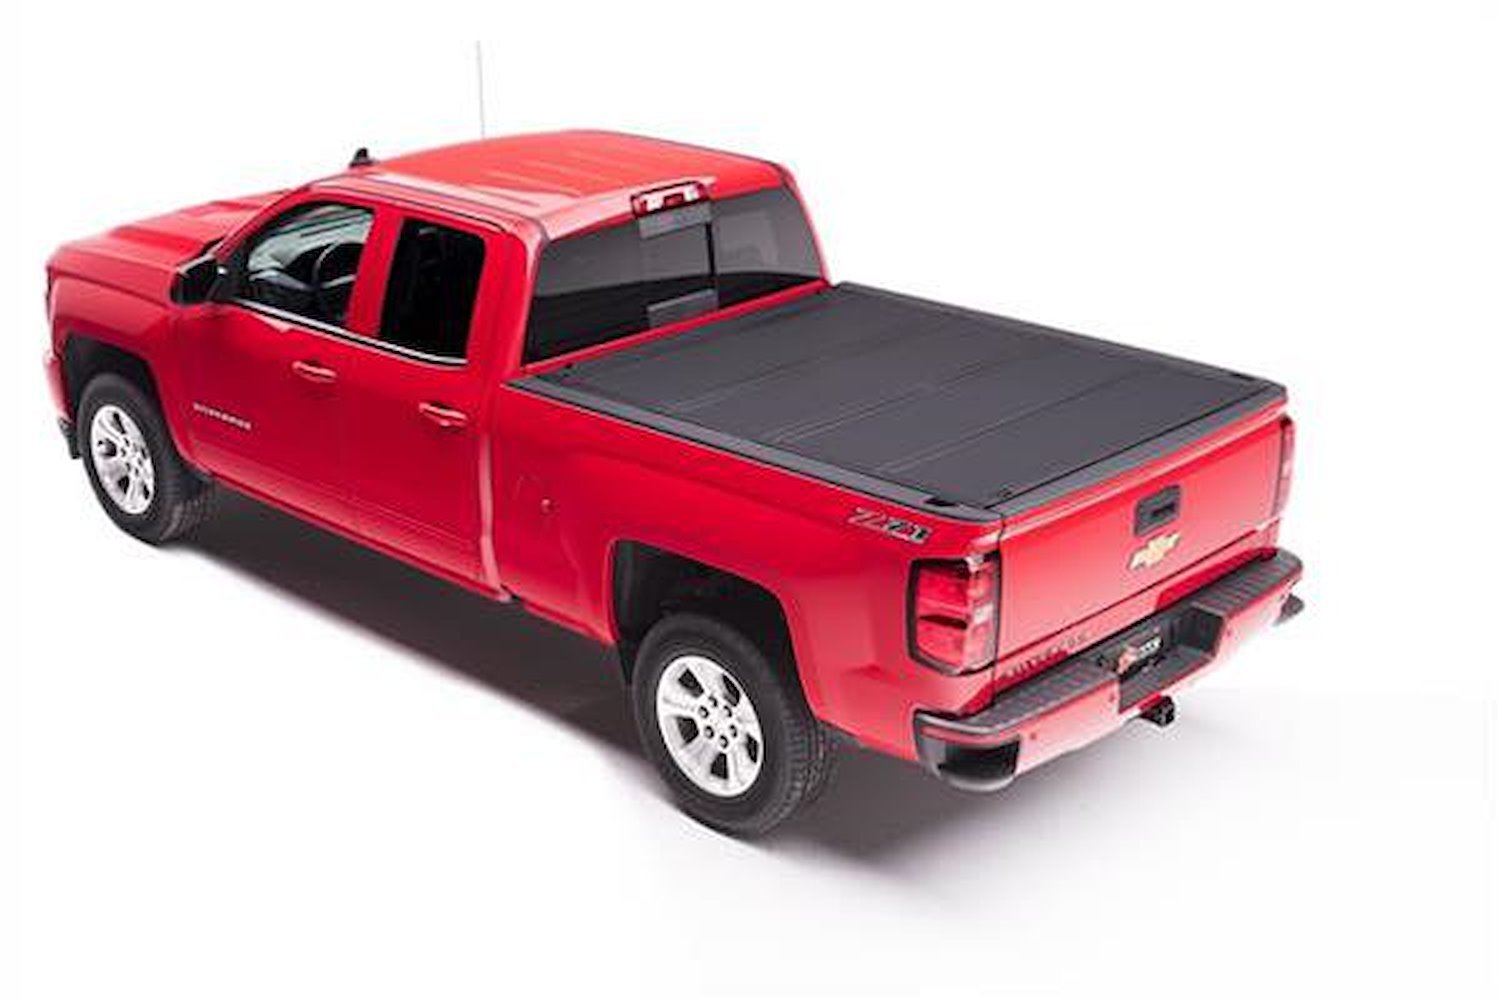 448132 BAKFlip MX4 for Fits Select GM Silverado/Sierra 8.2 ft. Bed 1500 (New Body Style), Hard Folding Cover Style [Black]